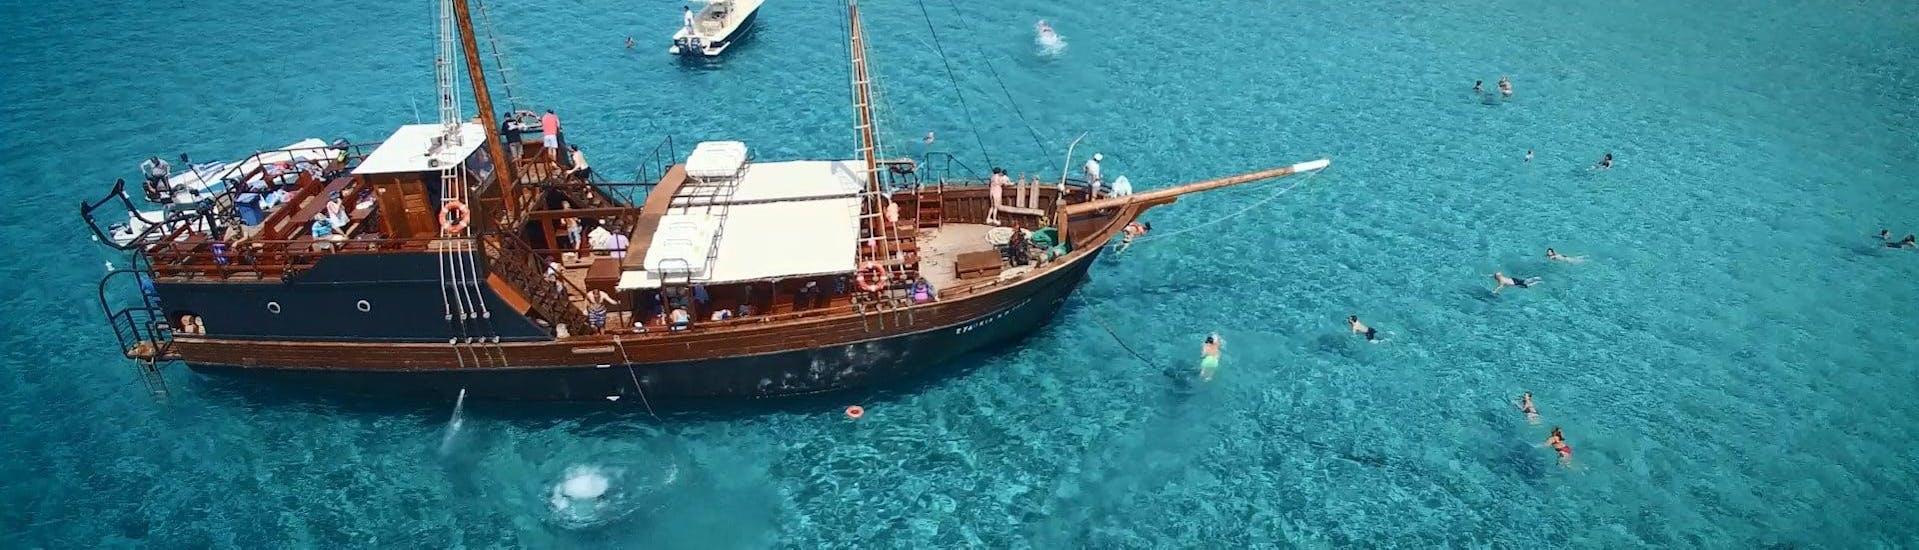 Picture of the pirtae boat used for the boat trips of Cretan Daily Cruises - Chrissi Islands.